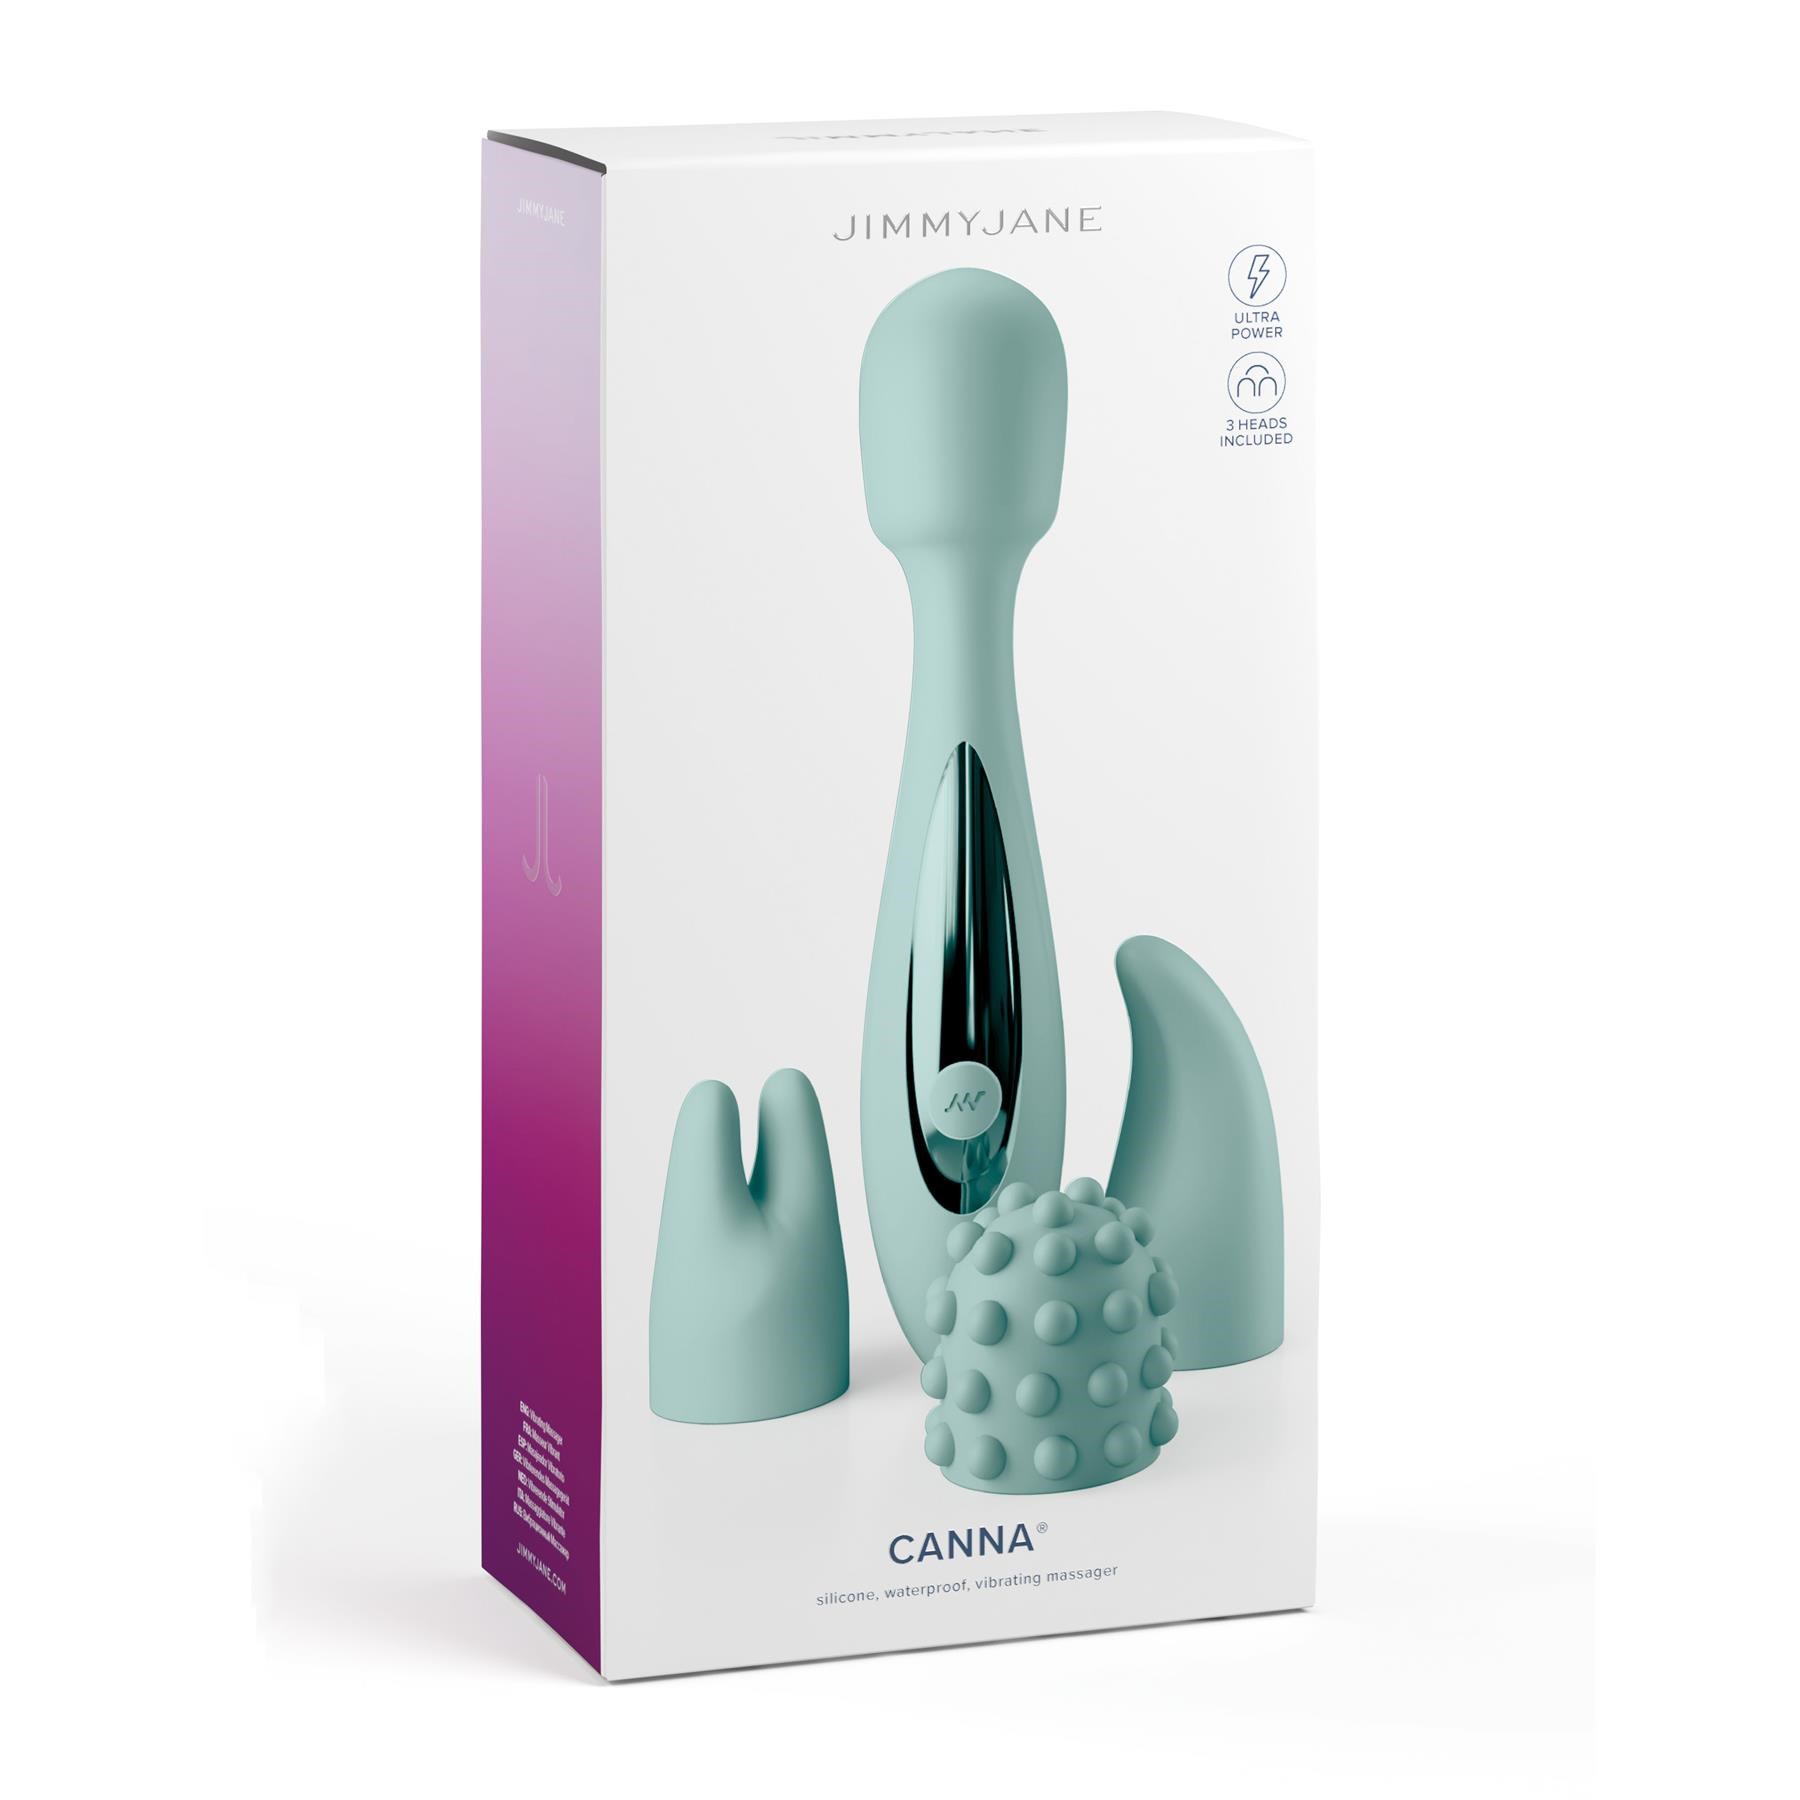 Jimmy Jane Canna Wand Massager With 3 Attachments - Packaging